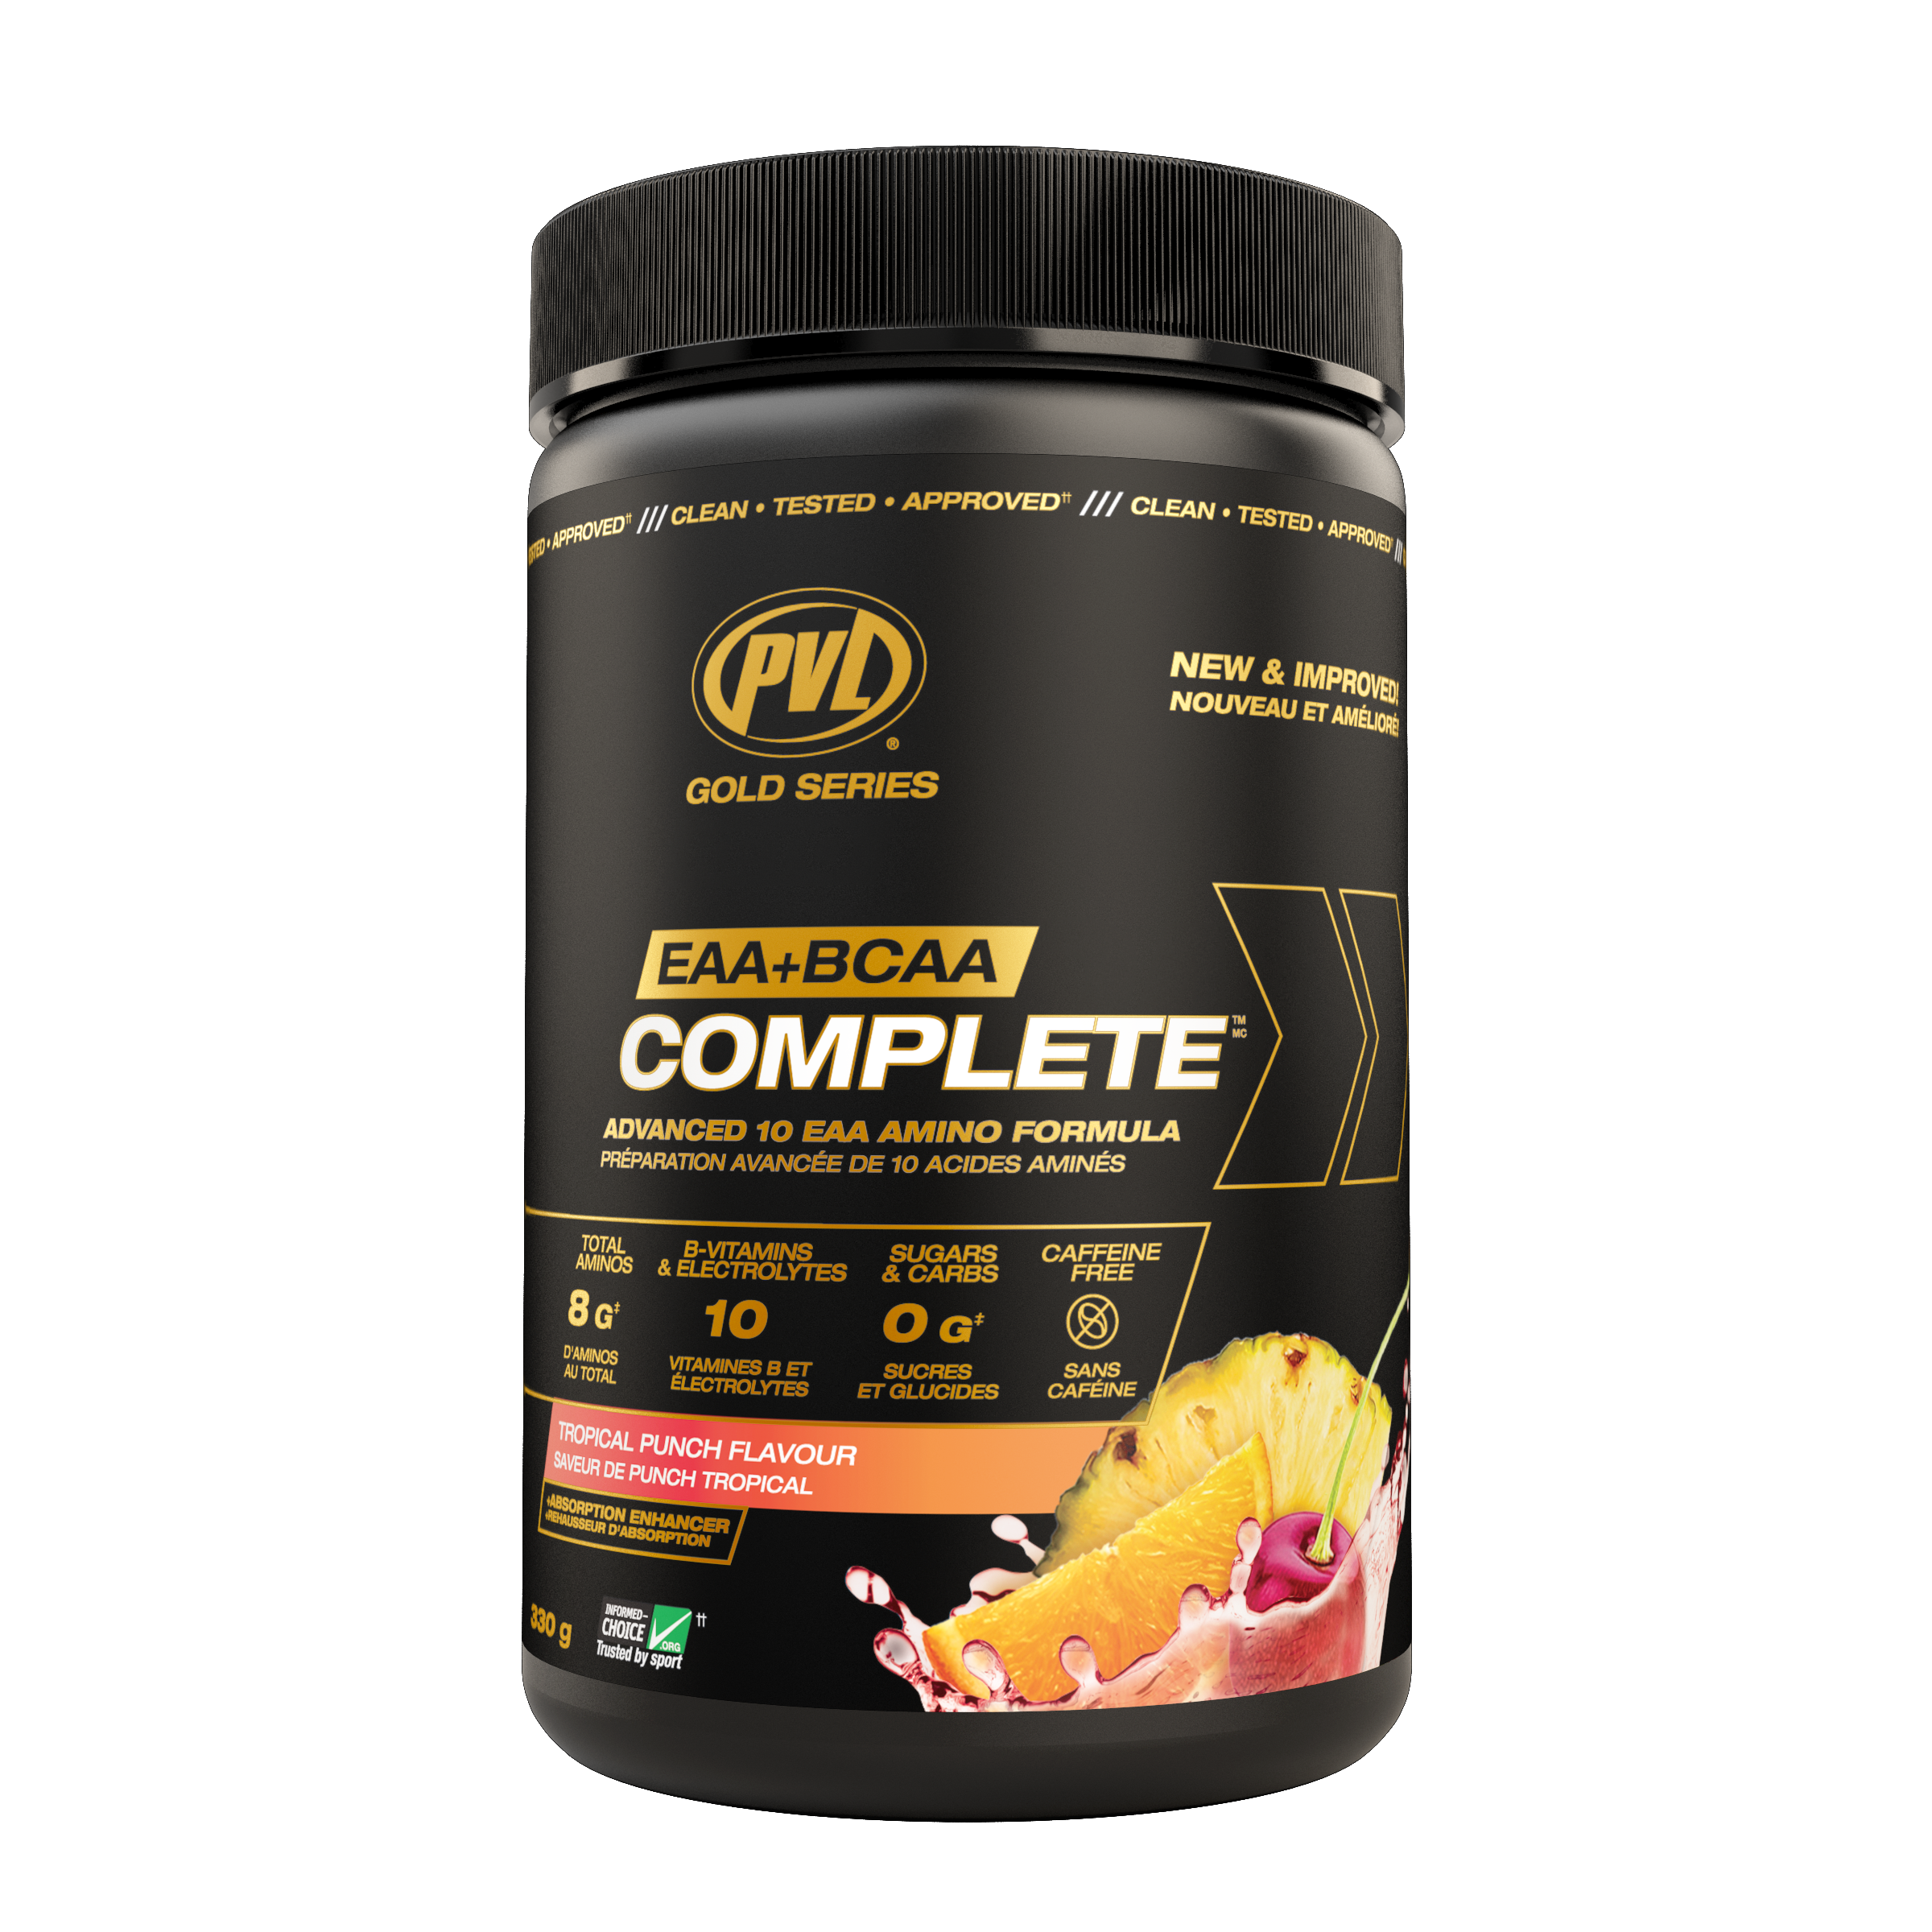 PVL EAA + BCAA Complete (330g) BCAAs and Amino Acids Tropical Punch Pure Vita Labs pvl-eaa-bcaa-complete-330g